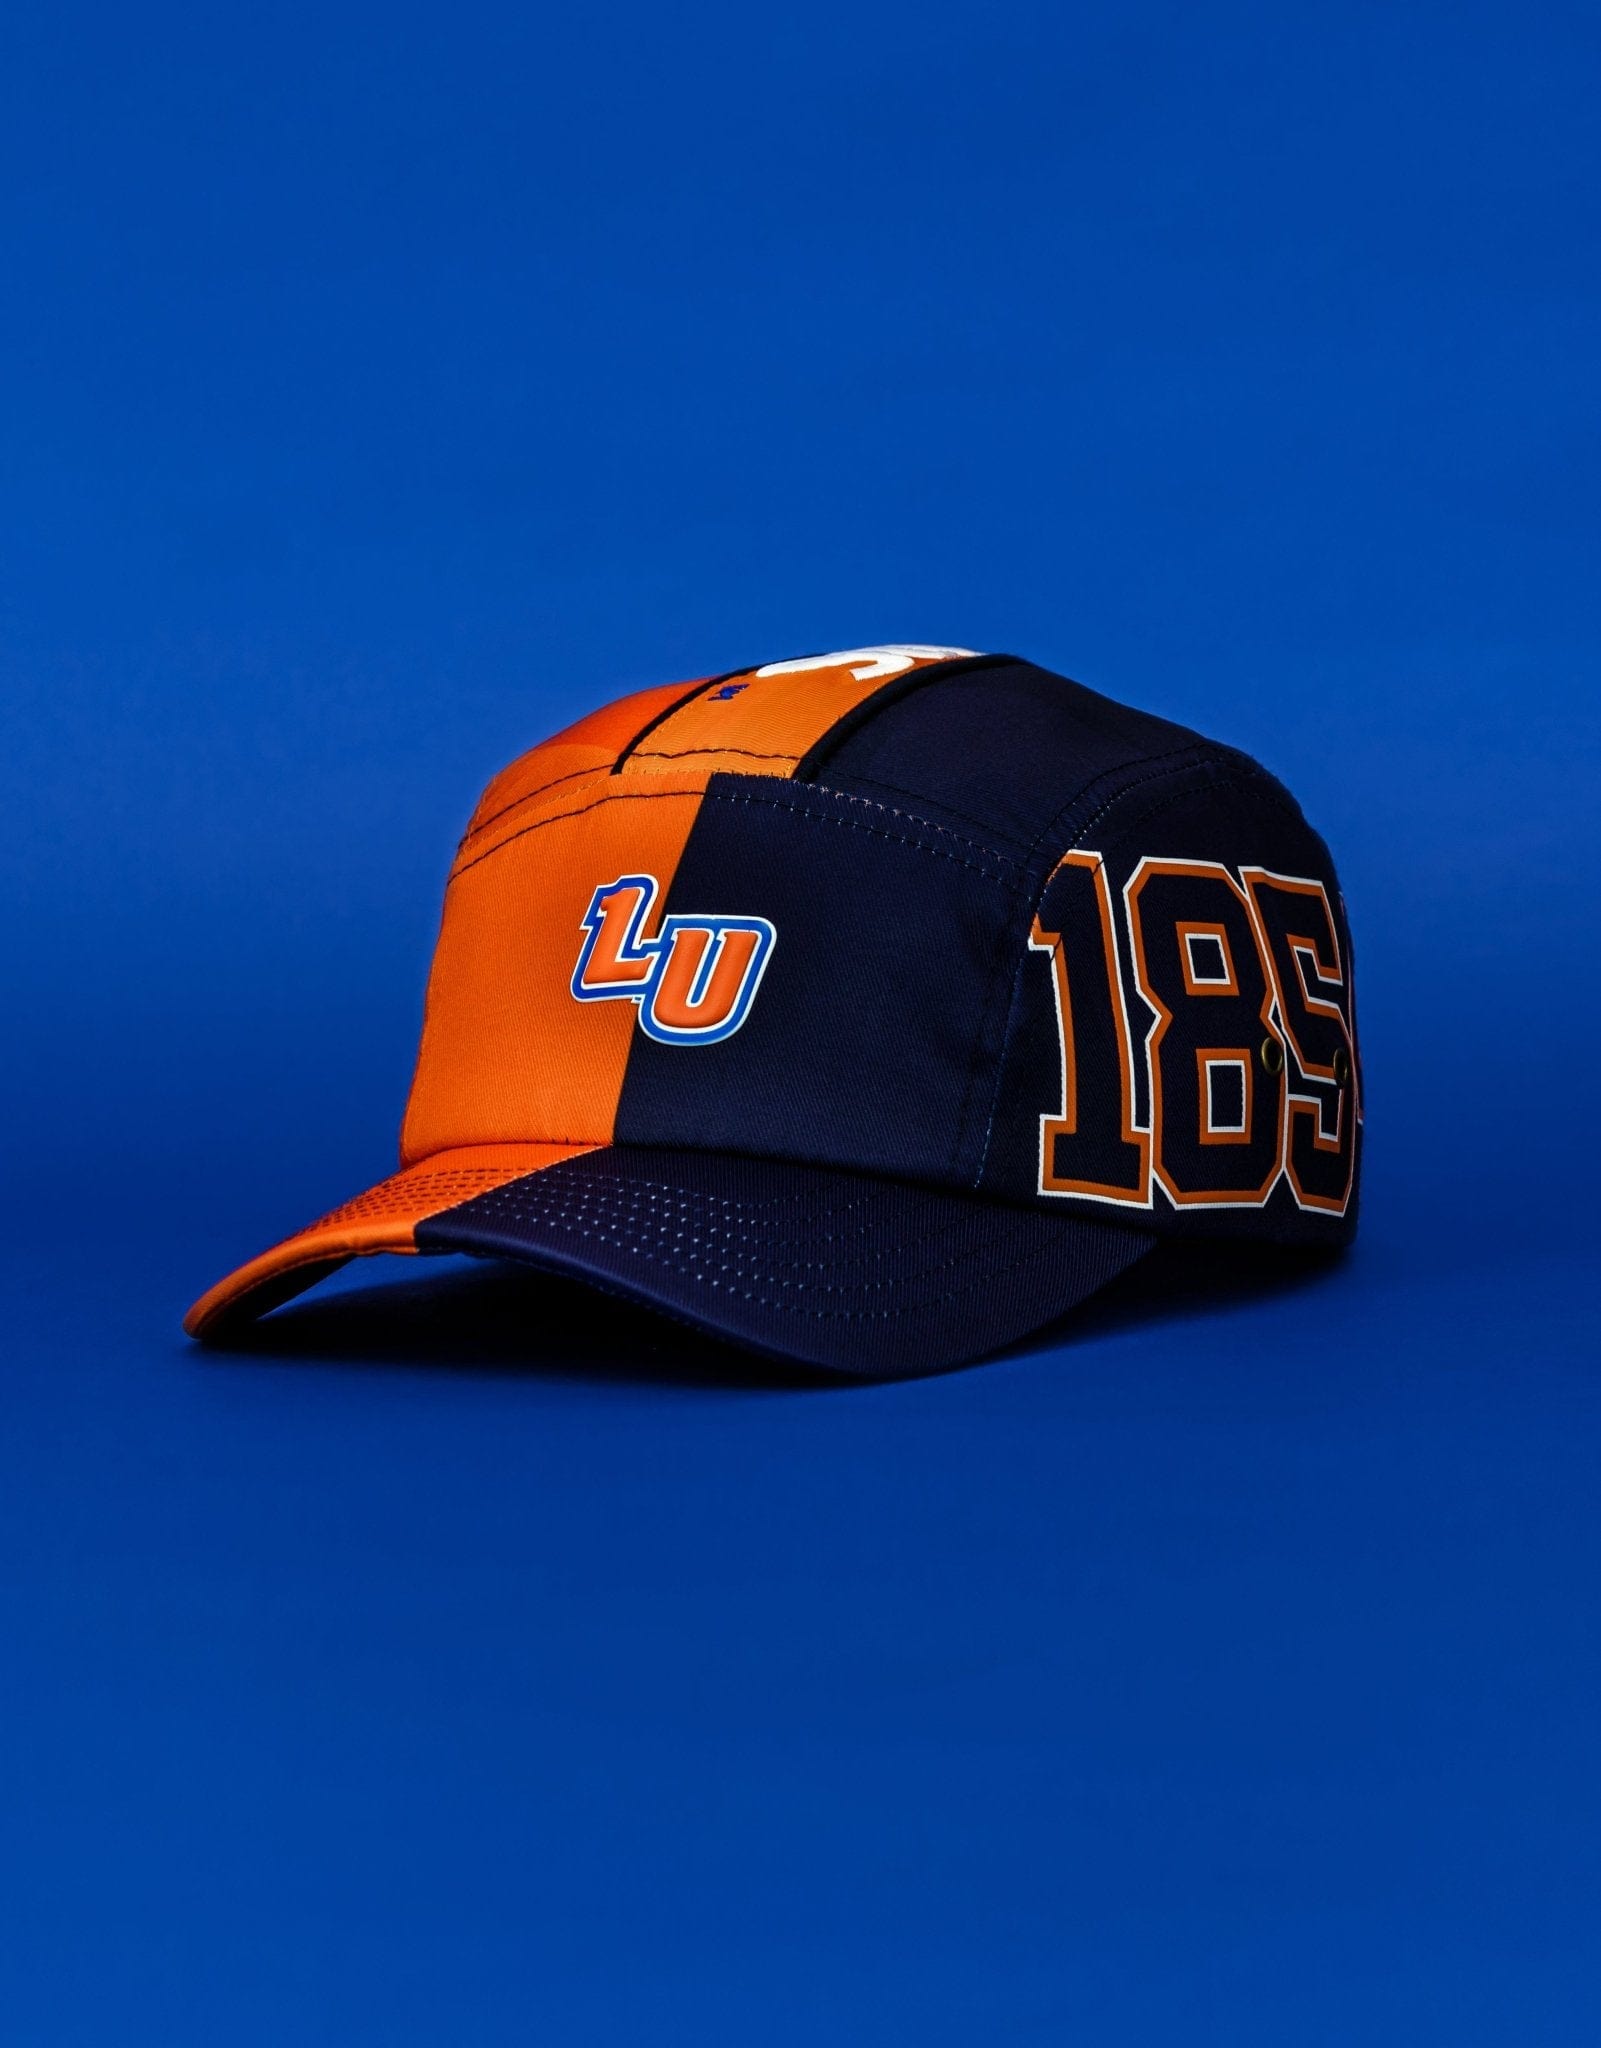 TheYard - Lincoln University - HBCU Hat